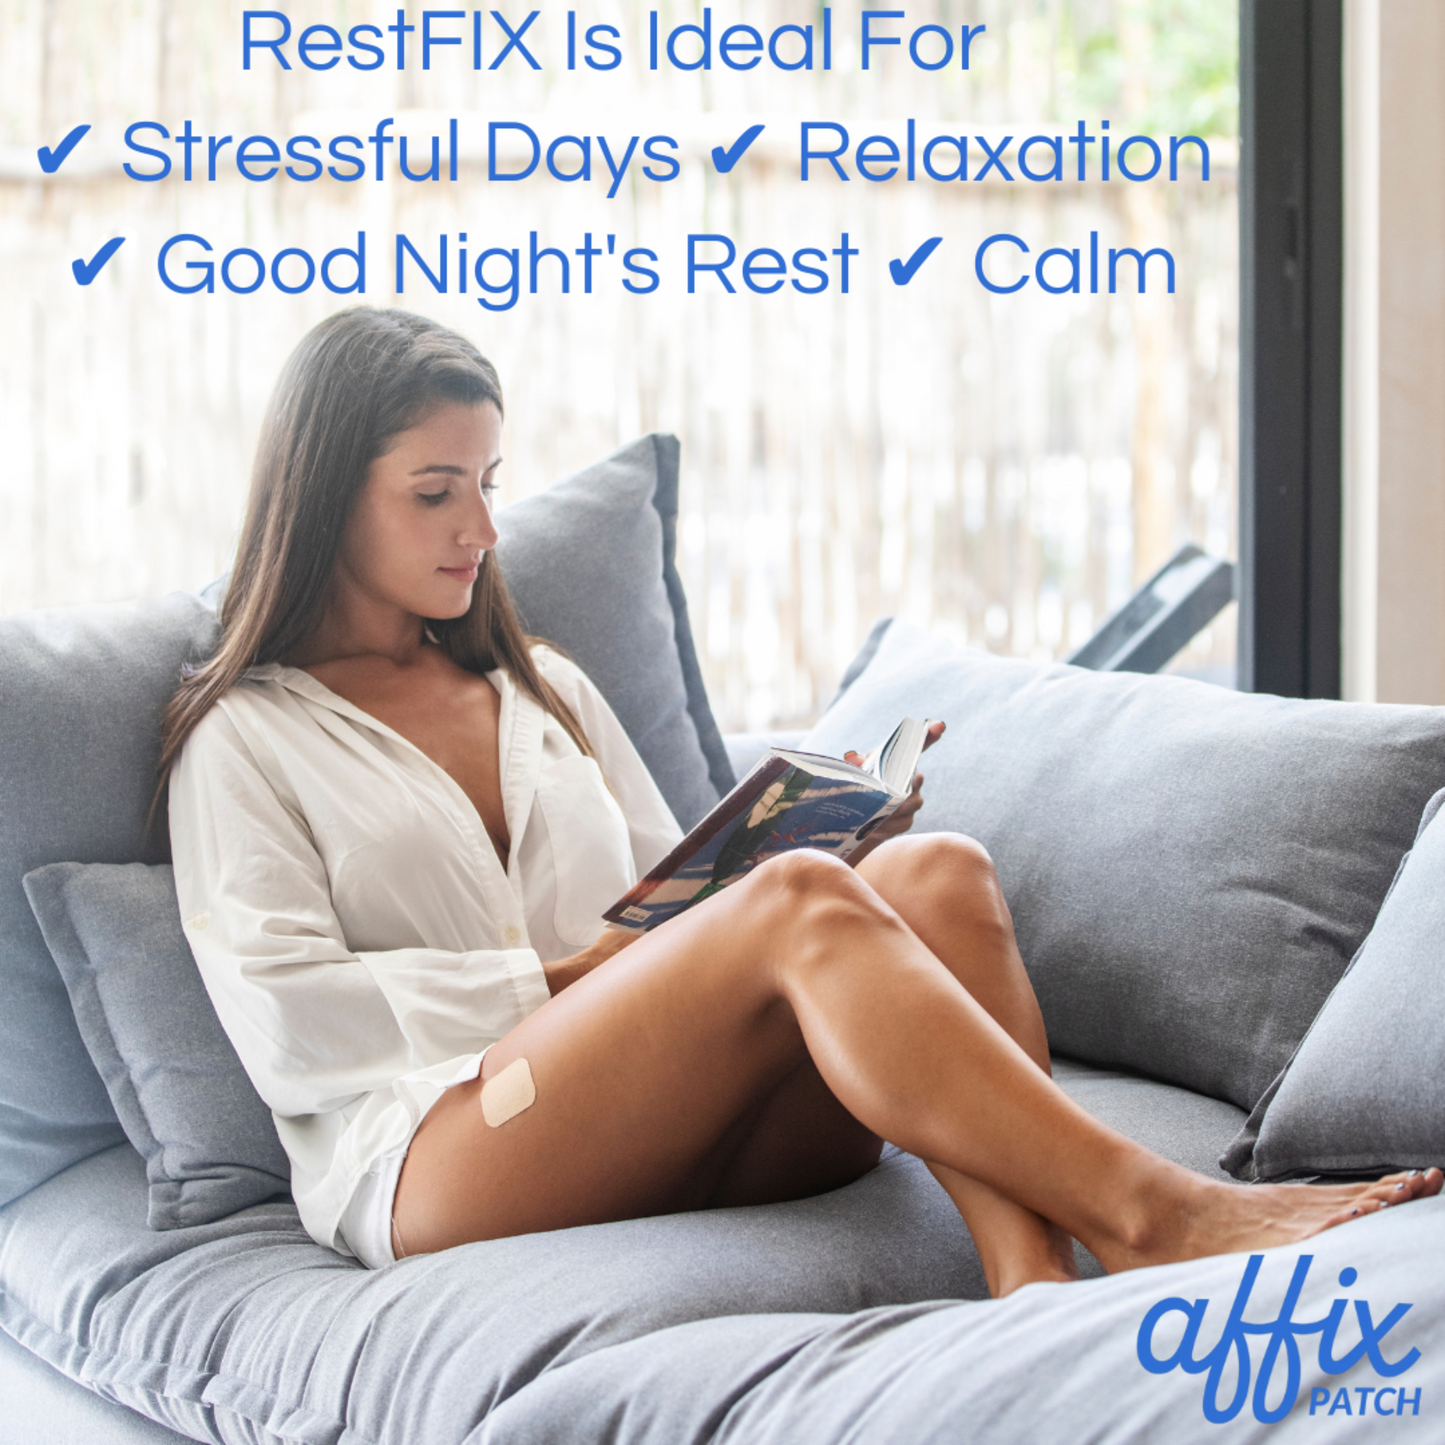 RestFIX™ Relaxation Patches